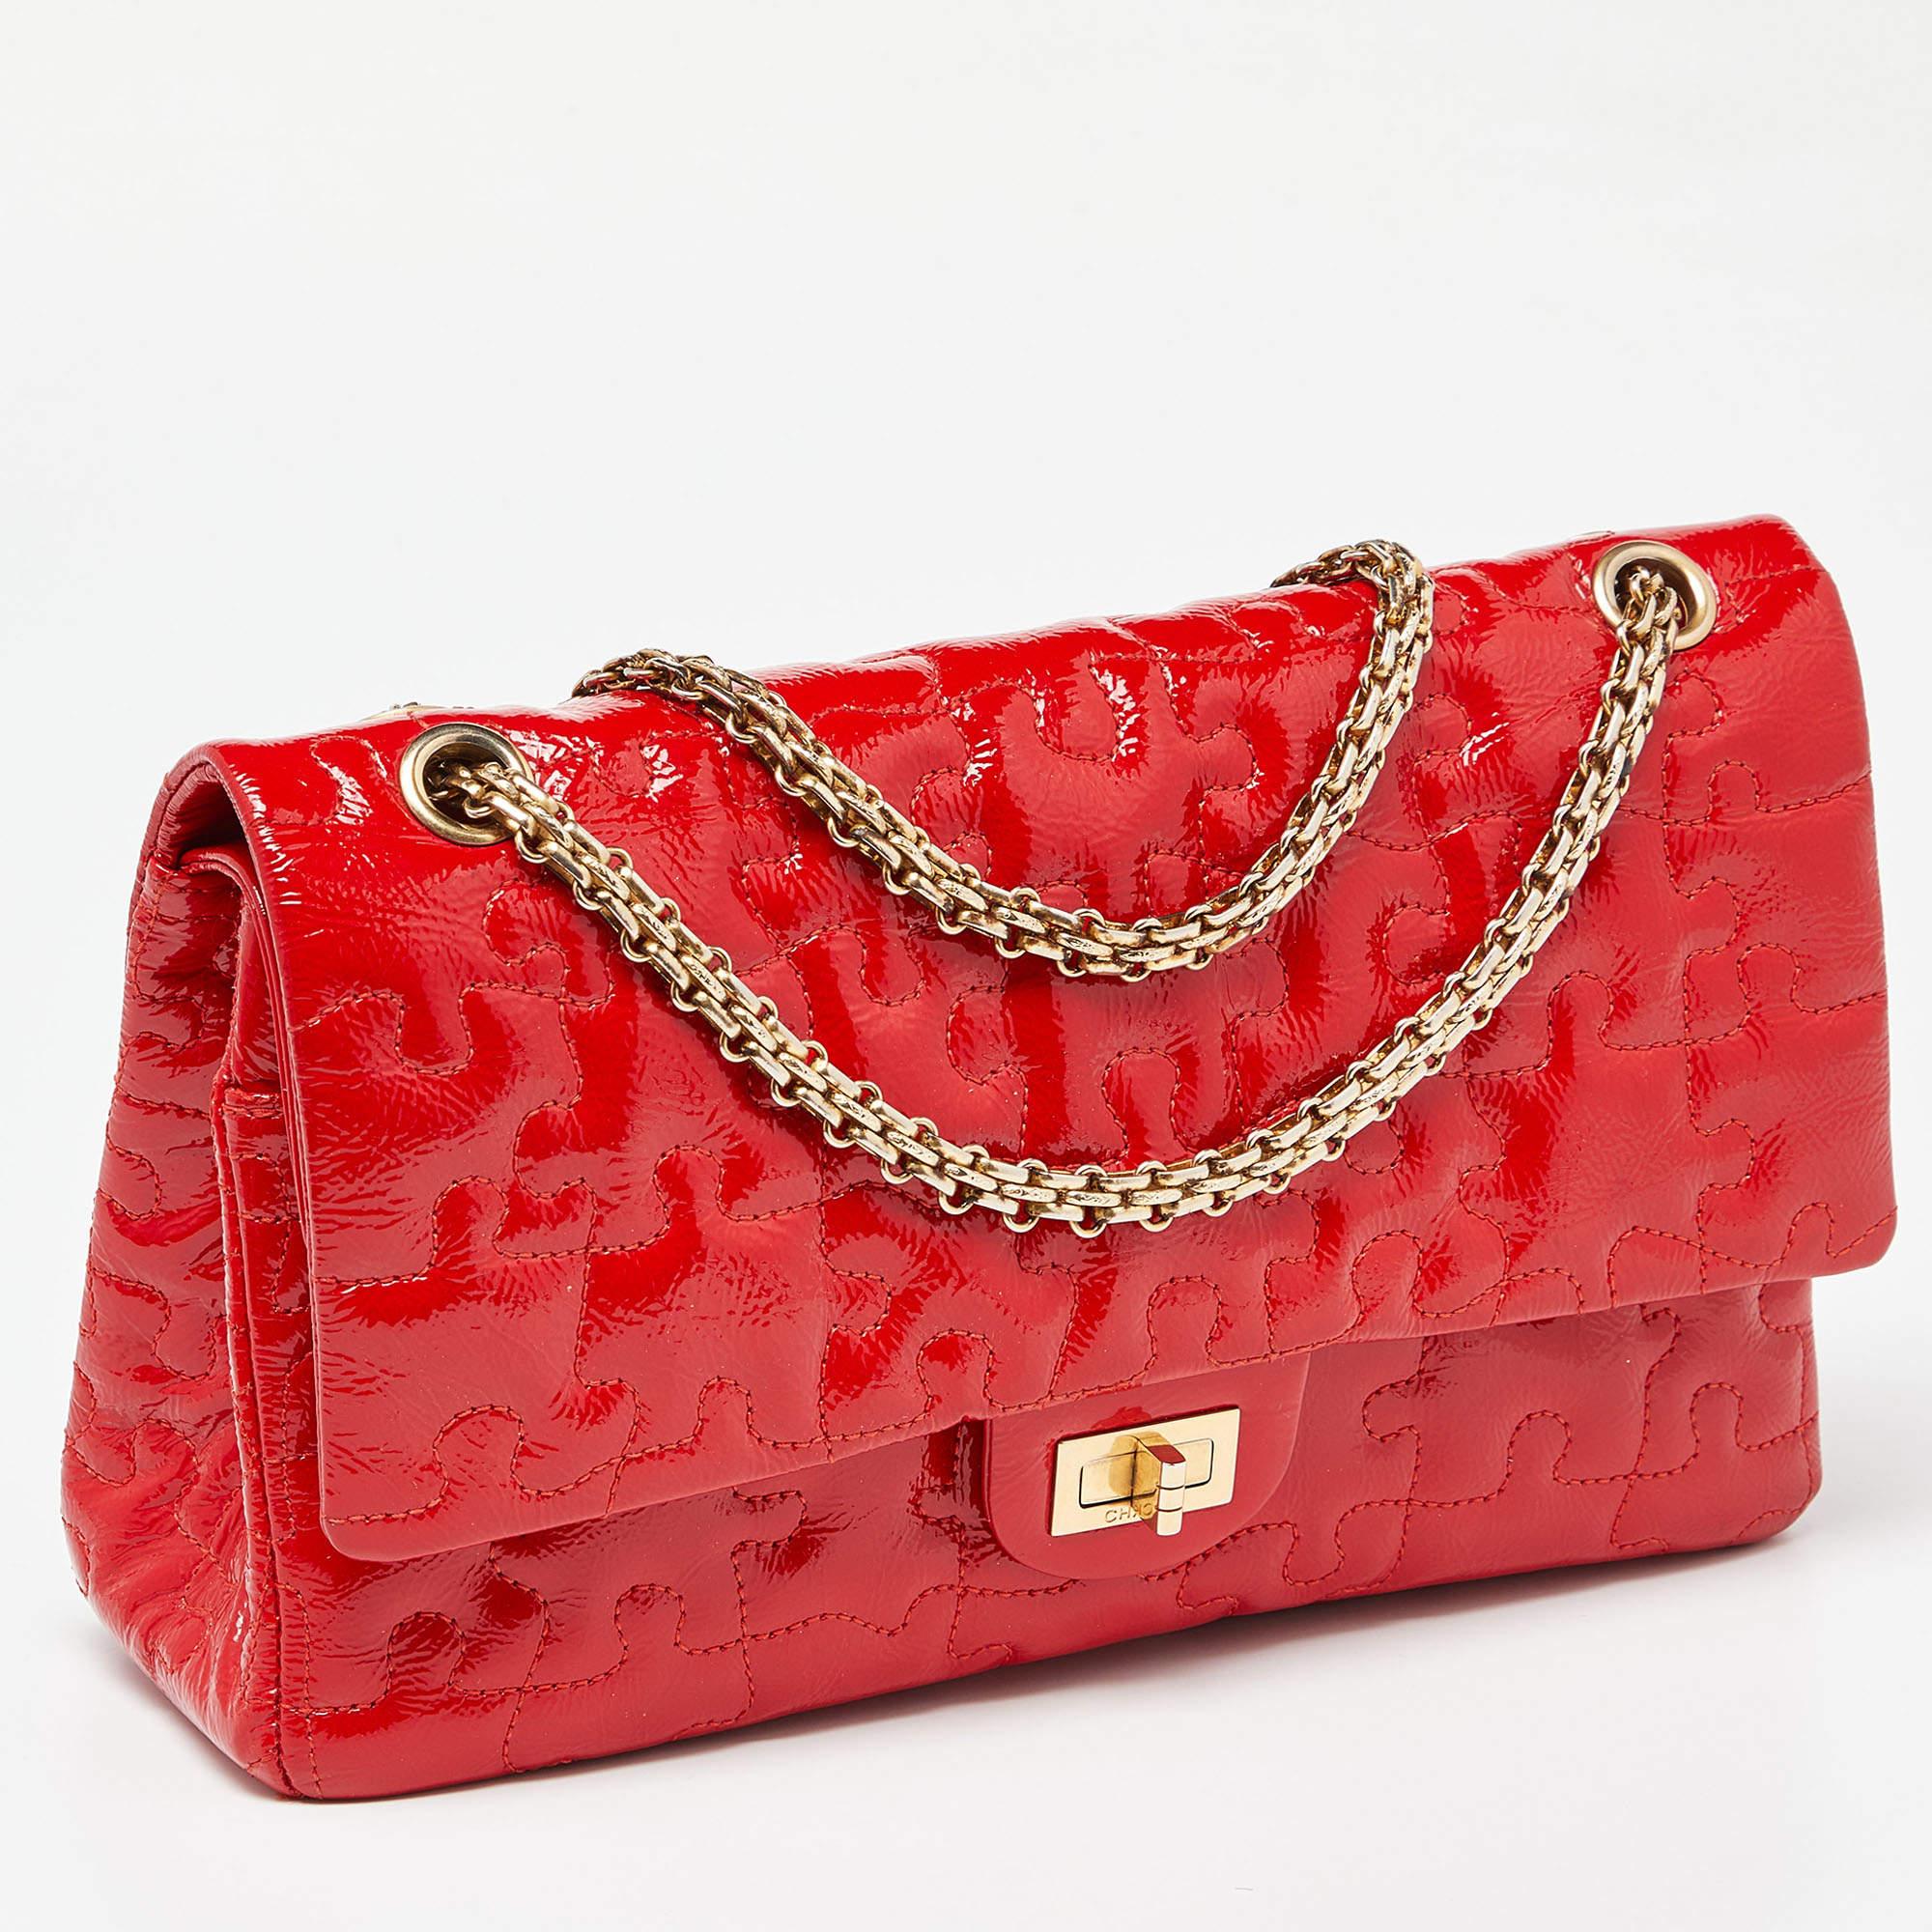 Chanel Red Puzzle Patent Leather Classic 226 Reissue 2.55 Flap Bag In Good Condition For Sale In Dubai, Al Qouz 2